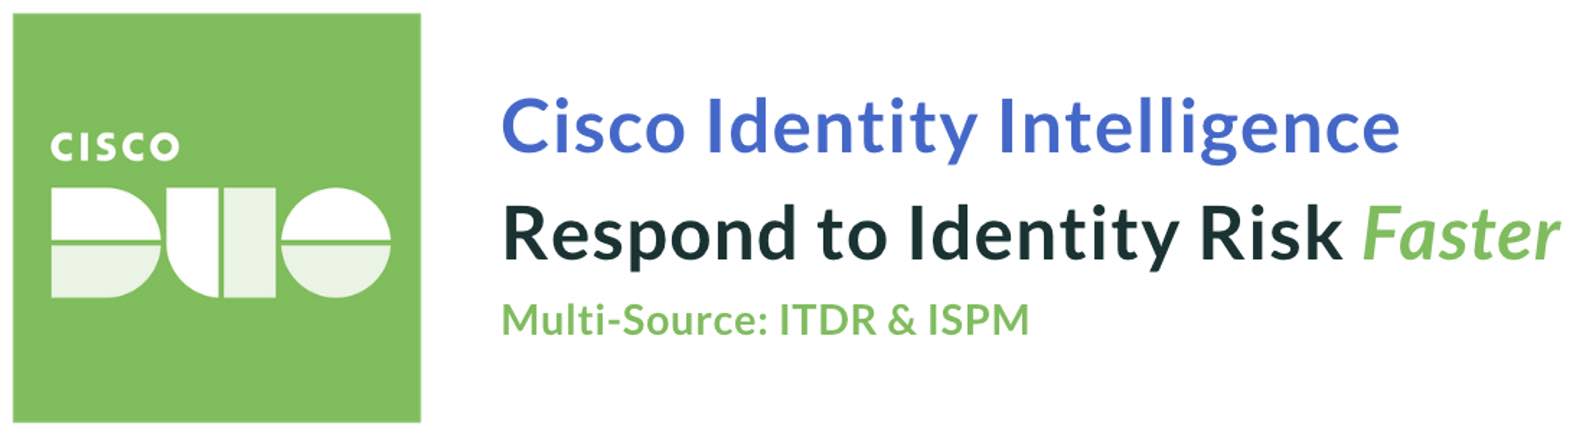 Cisco Duo logo accompanied by text that reads: 